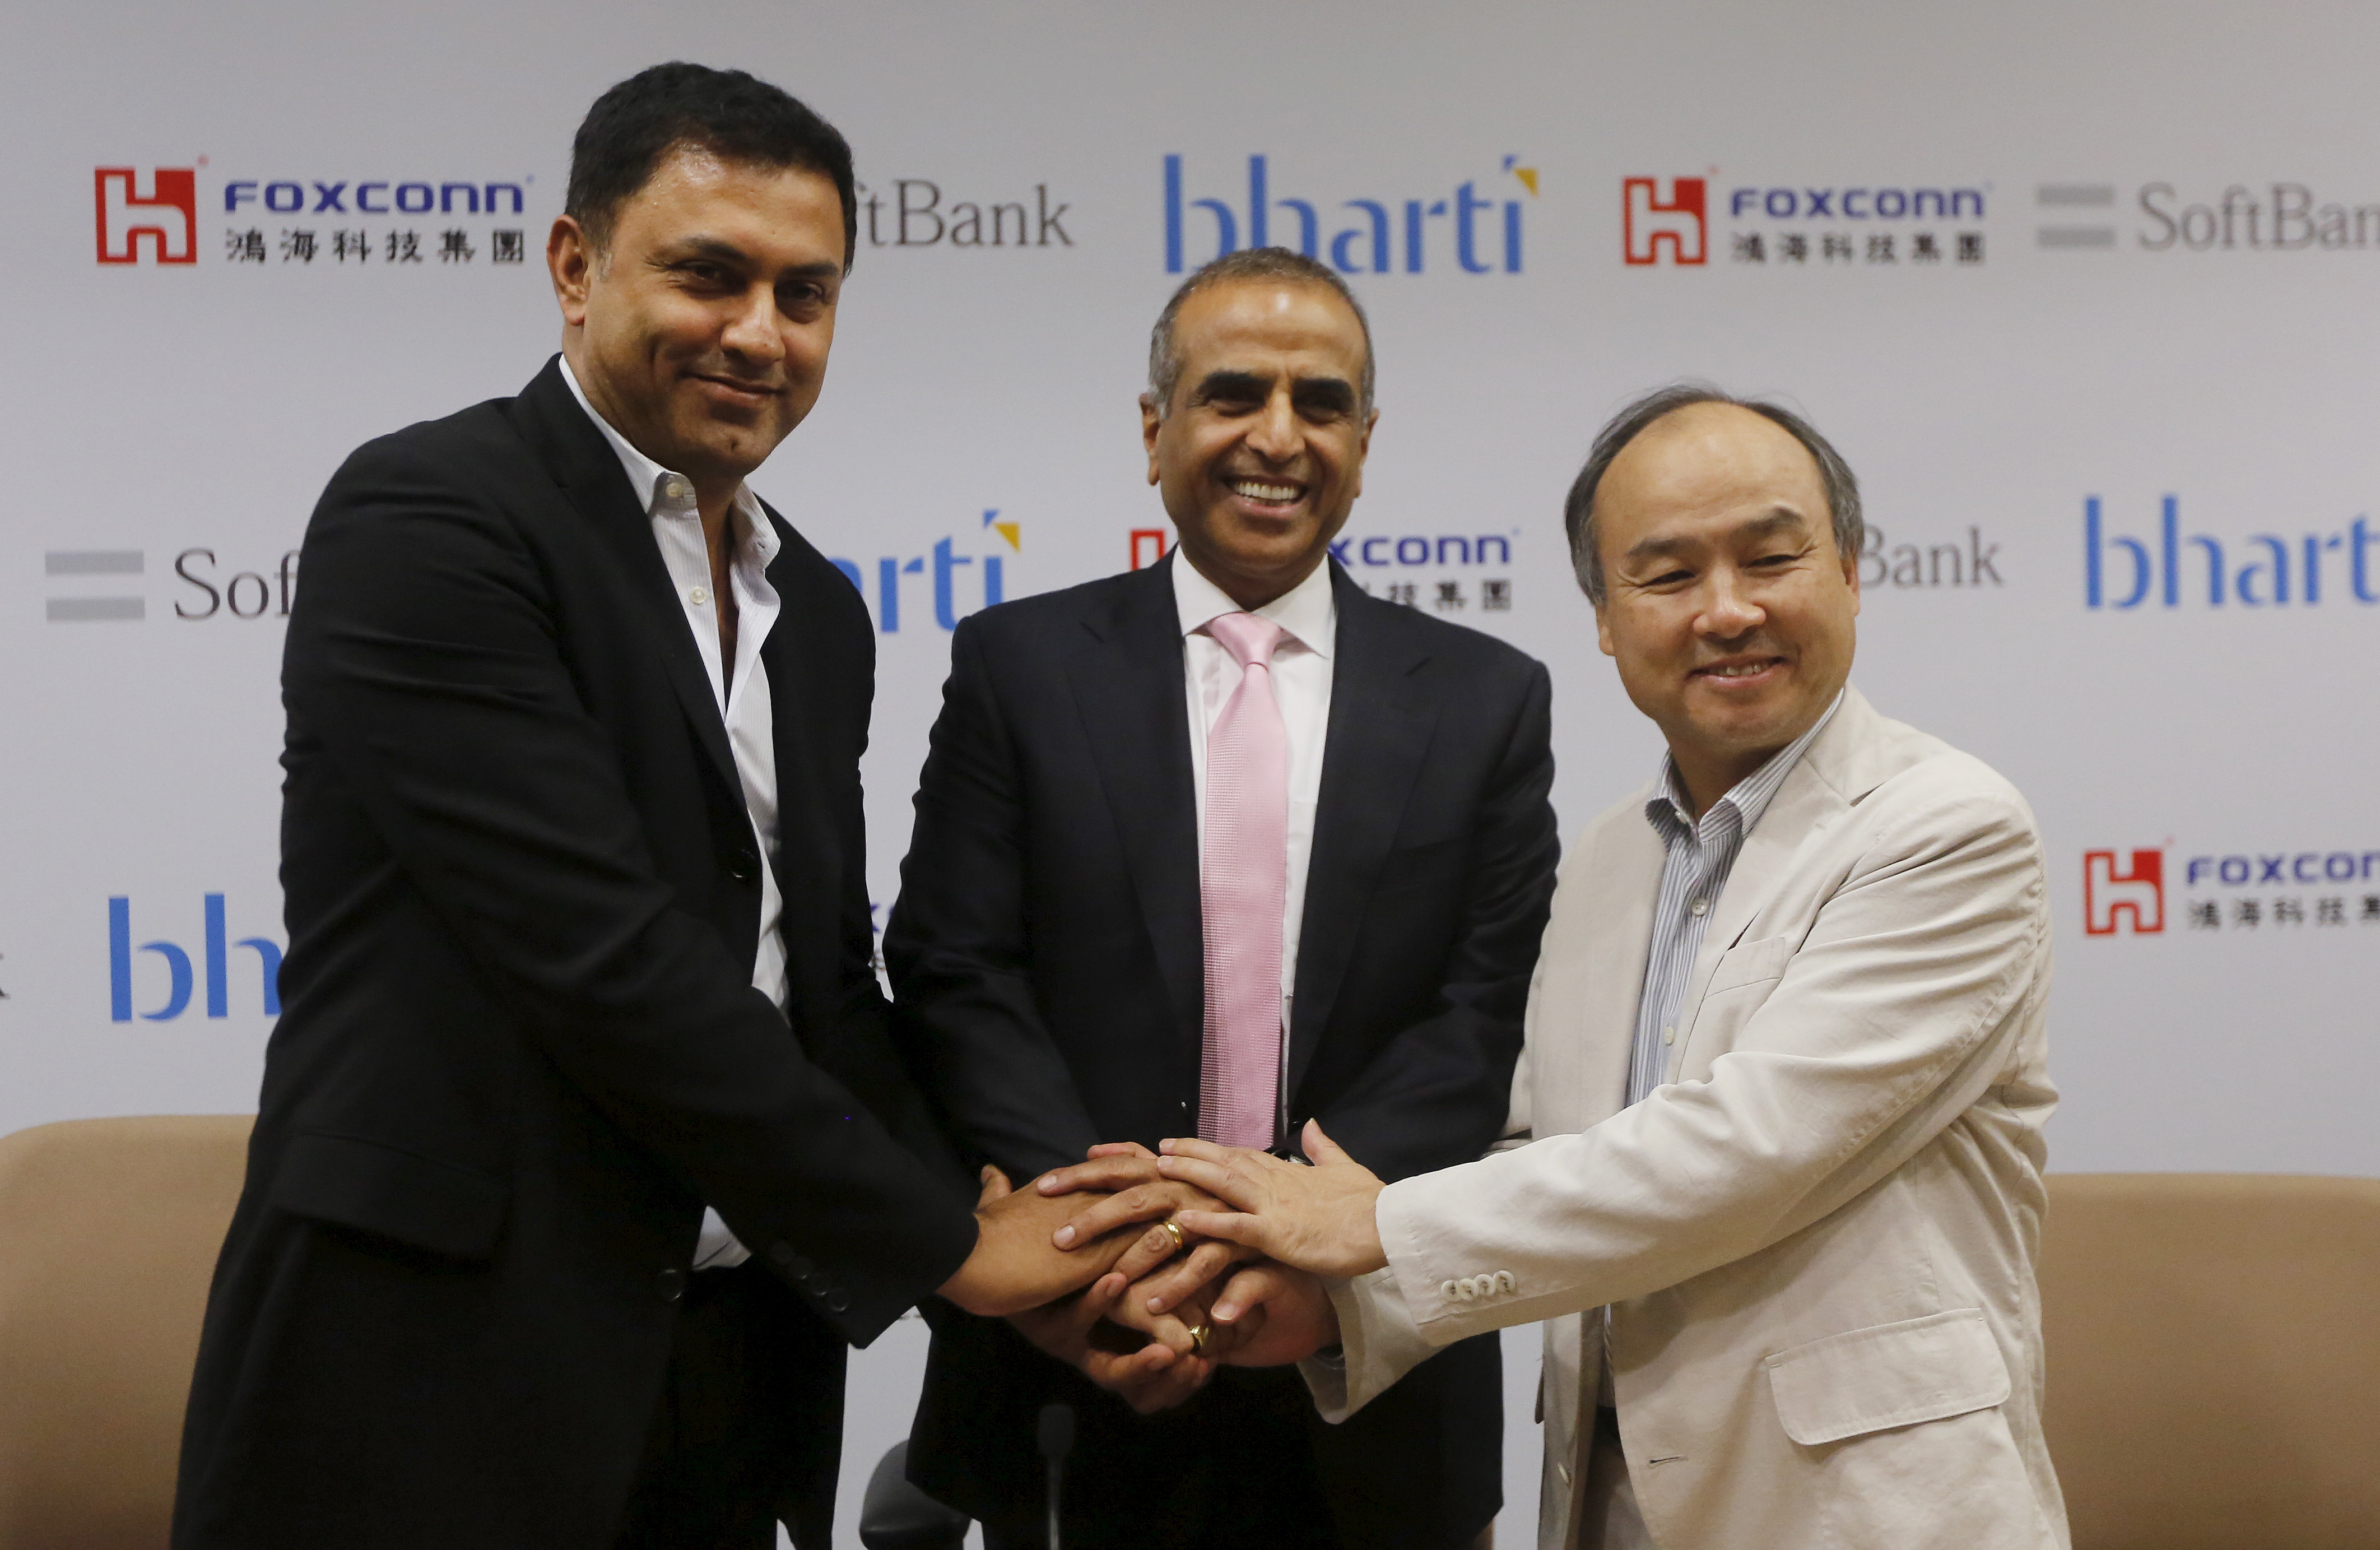 From right: Masayoshi Son, right, founder and CEO of SoftBank; Sunil Bharti Mittal, chairman of Bharti Enterprises; and Nikesh Arora, president of SoftBank, shake hands before the start of a news conference in New Delhi on June 22, 2015 (Adnan Abidi—Reuters)